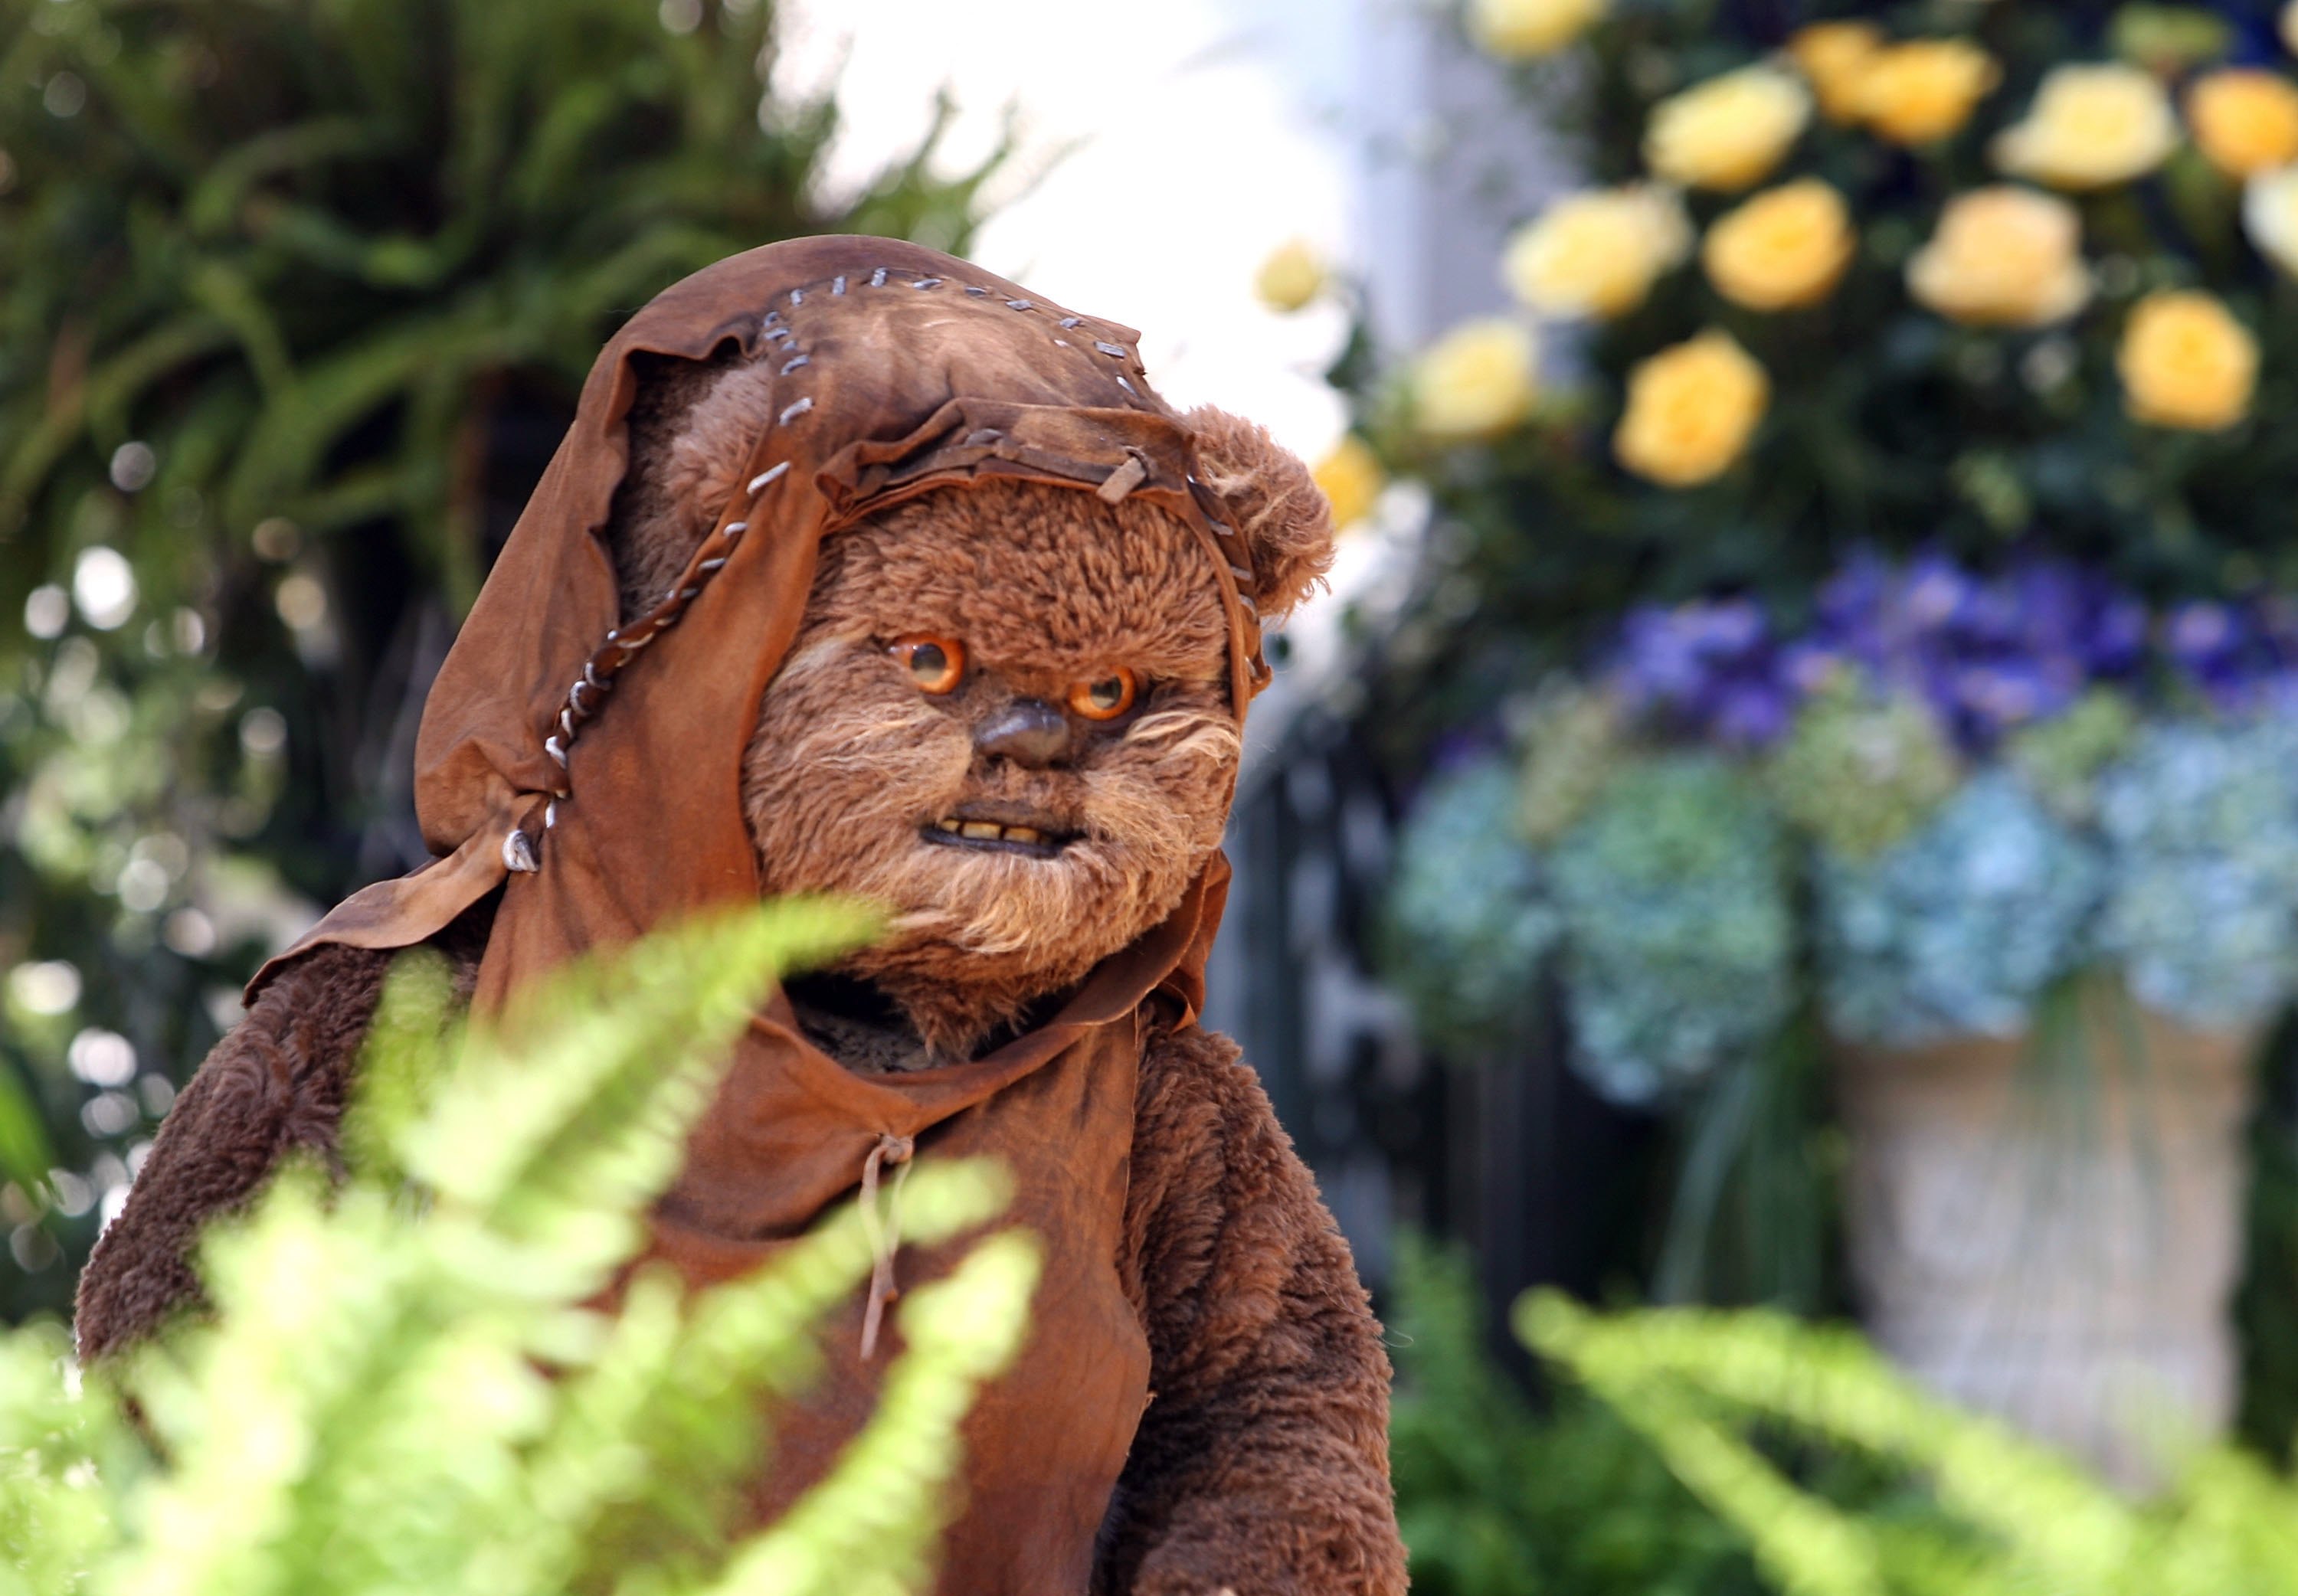 7 Feelings About The 'Star Wars' Ewok Movie.